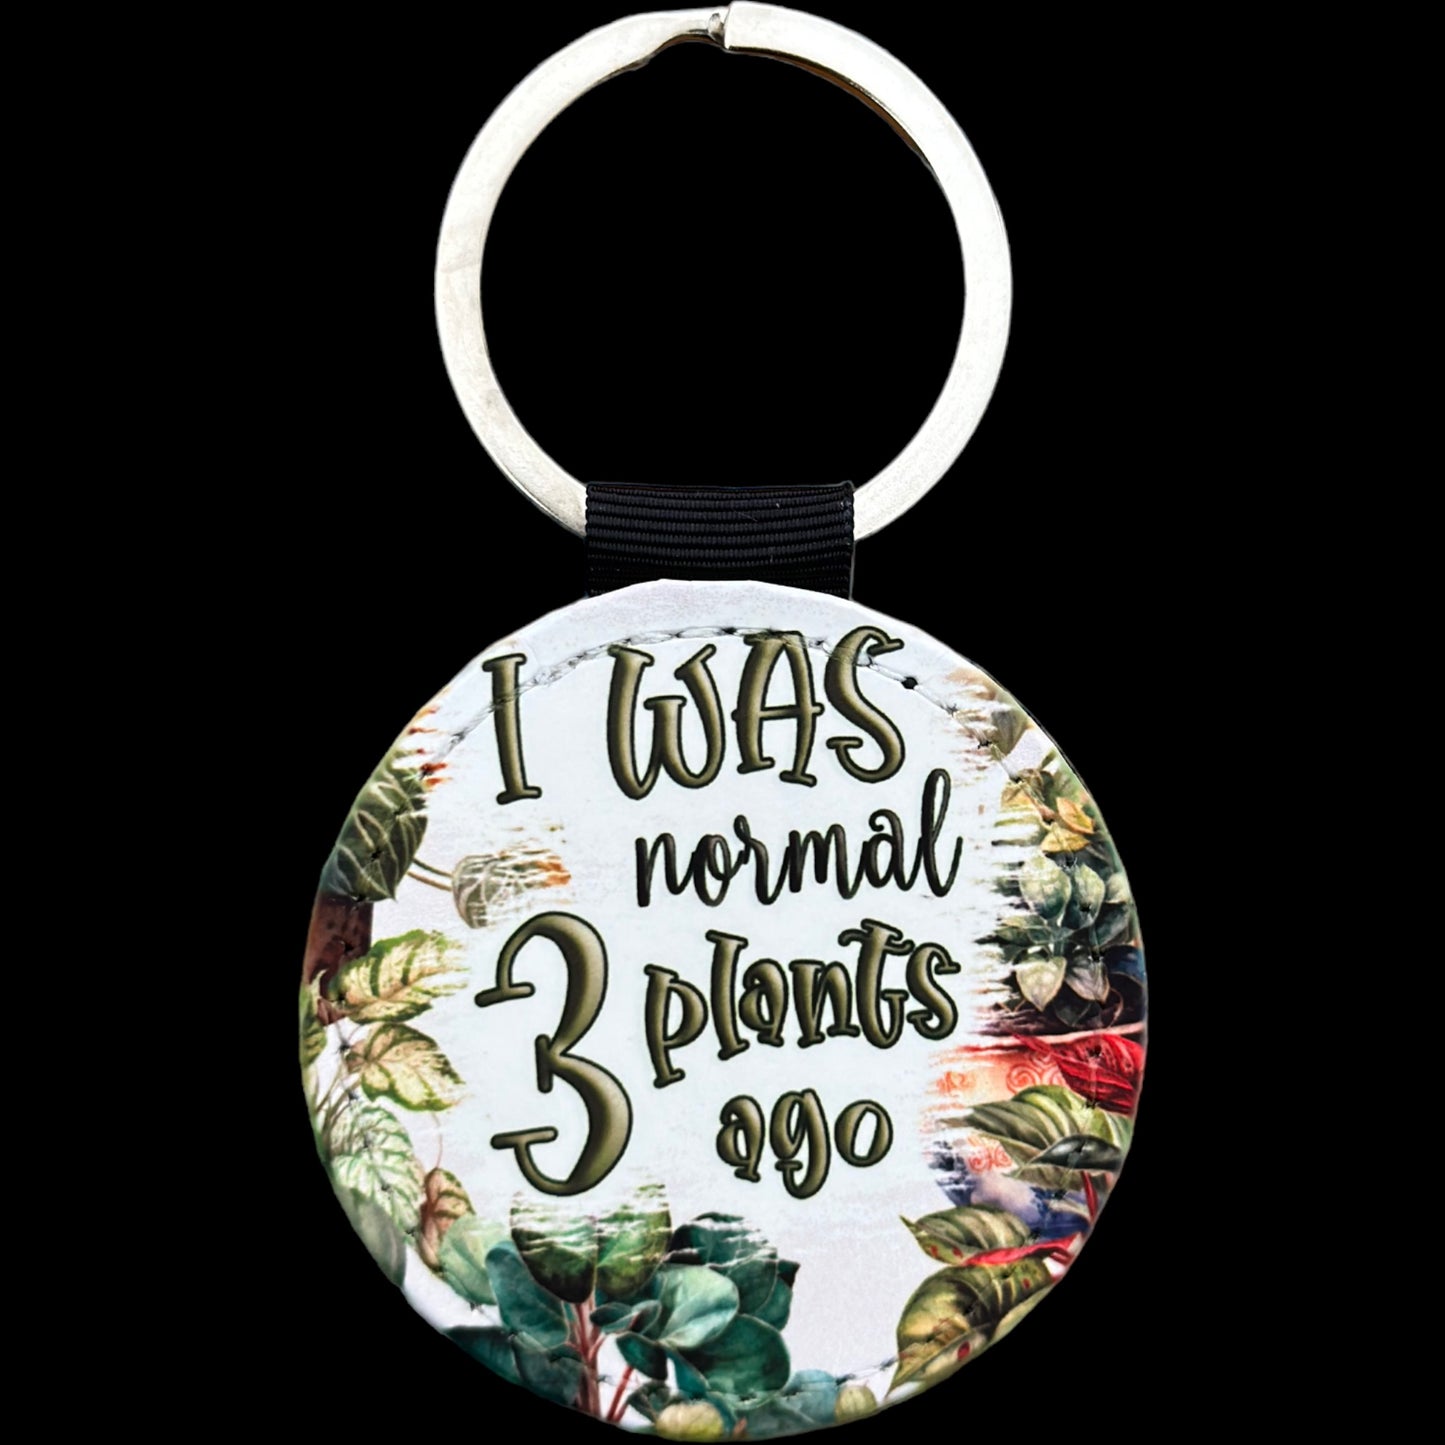 Key Ring - I Was Normal 3 Plants Ago